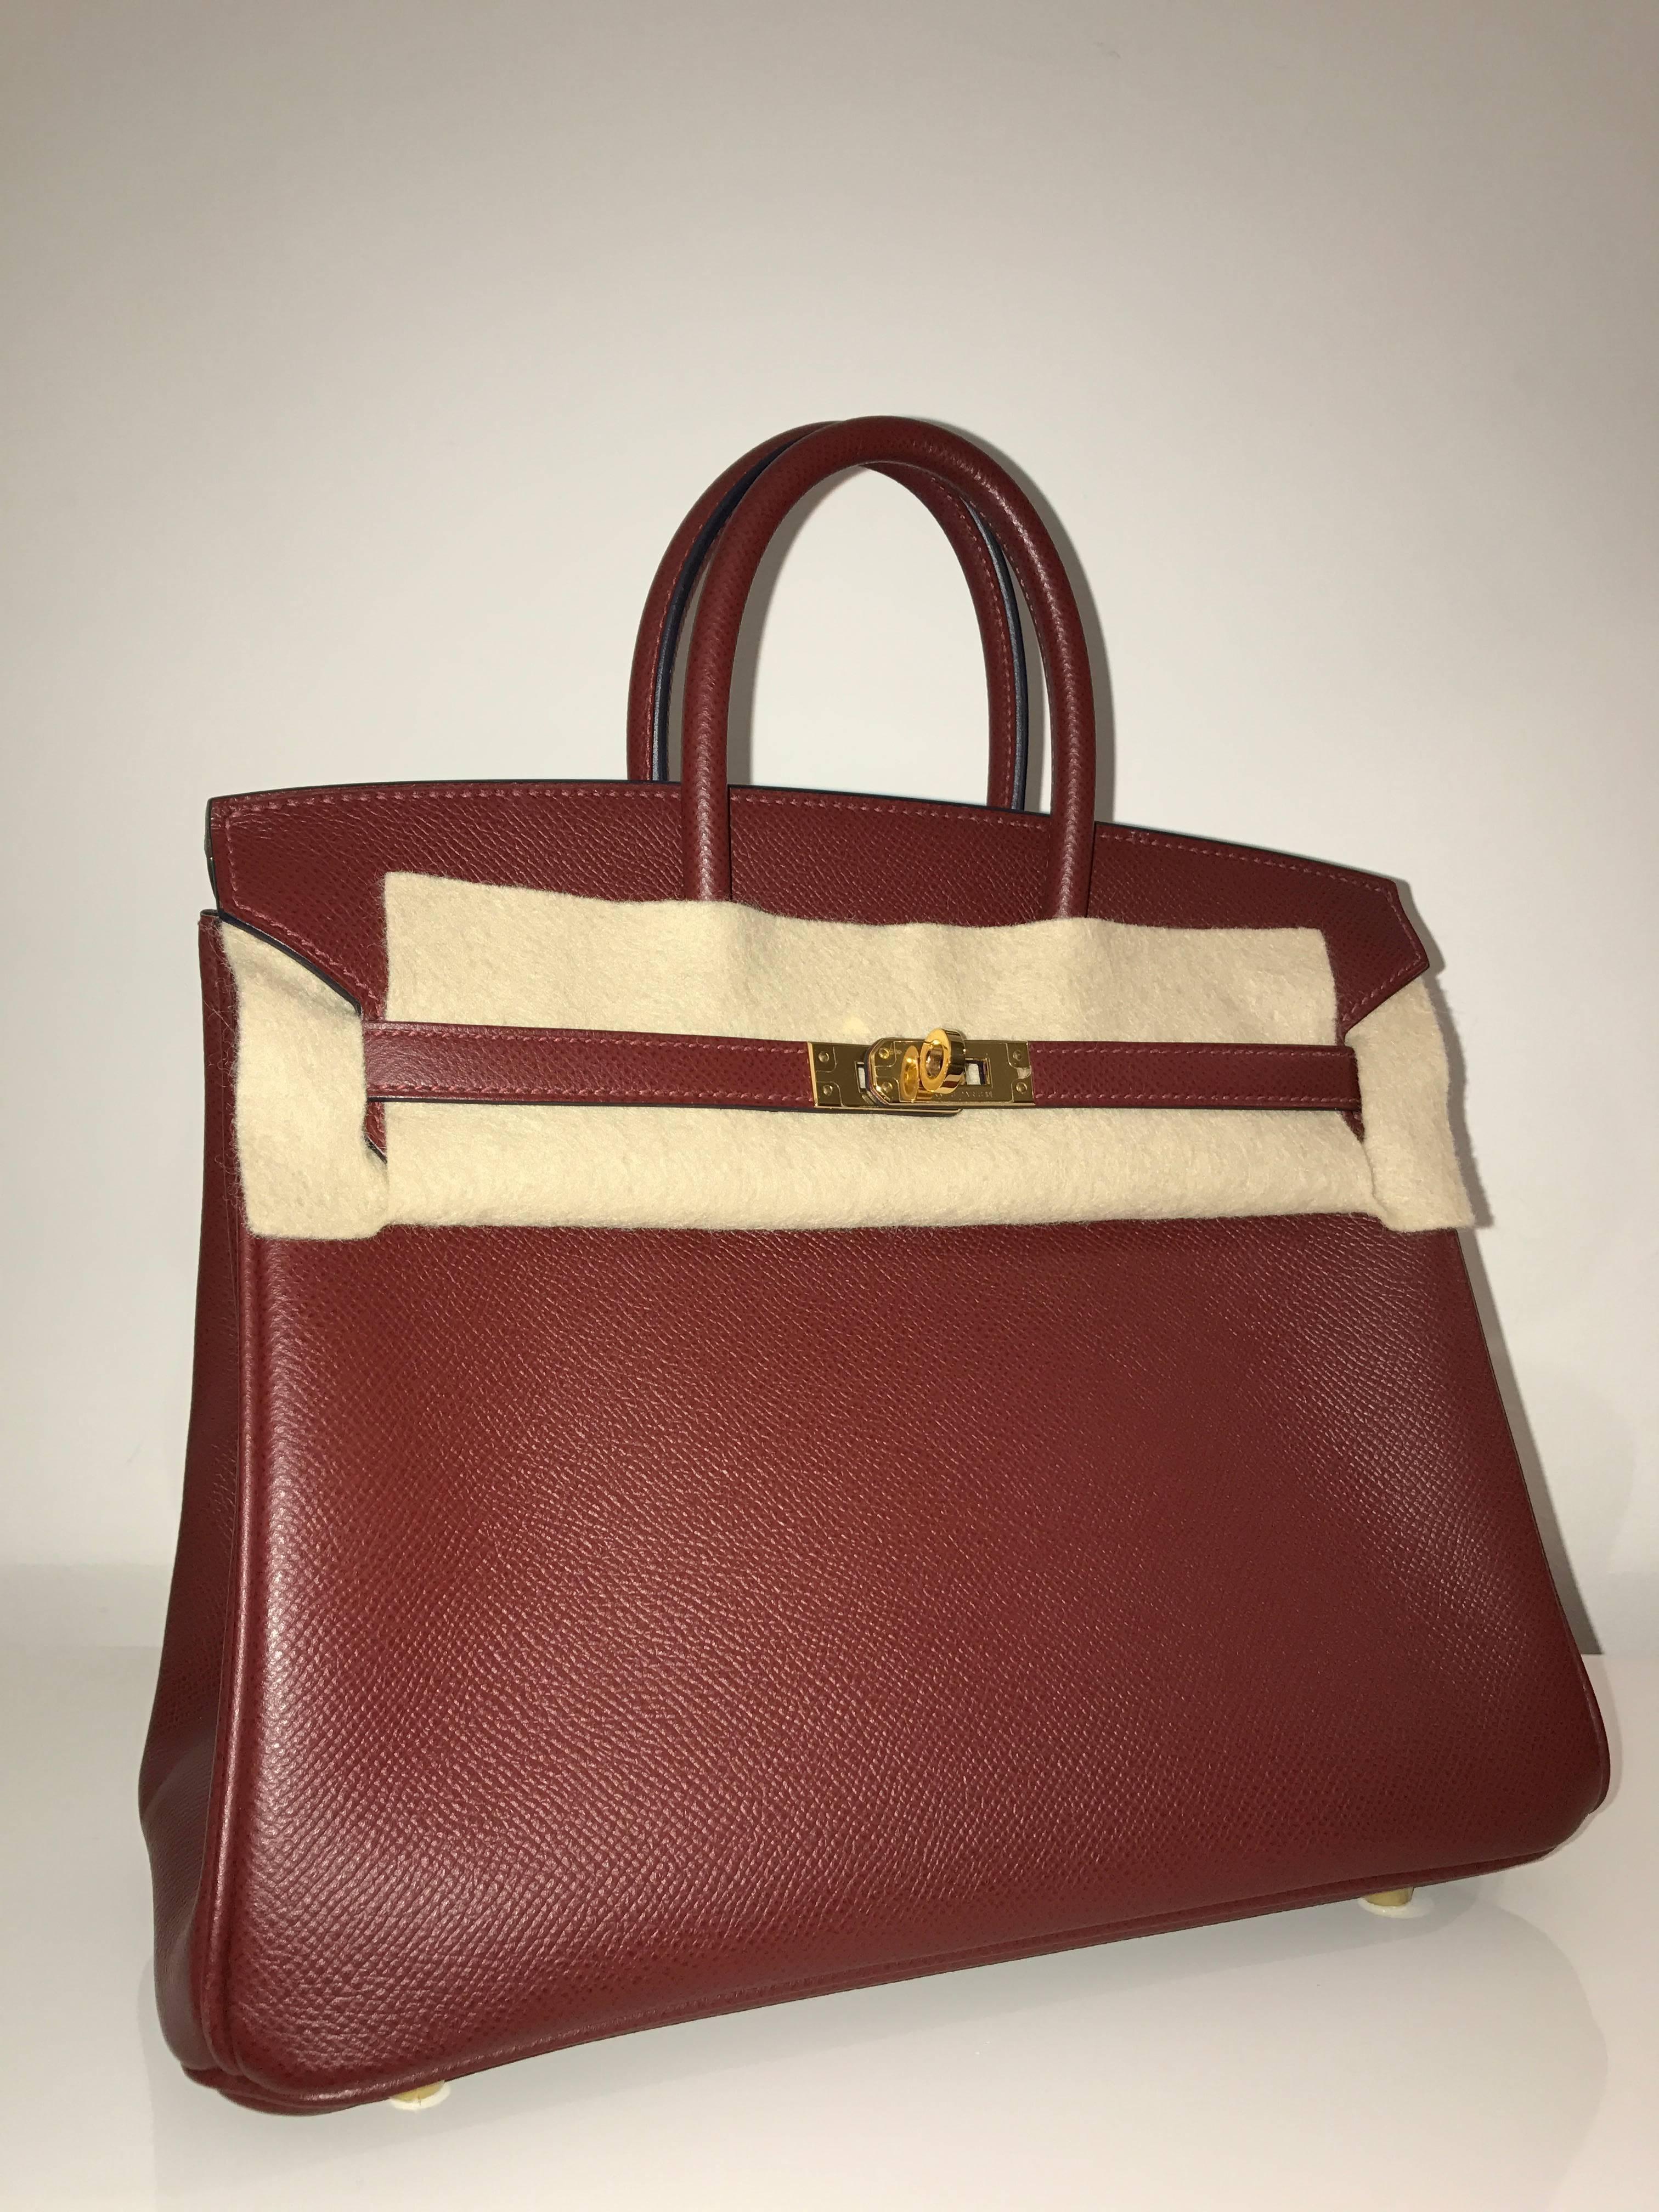 Hermes 
Birkin Size 25
Epsom Leather 
Colour Rouge H 
Gold Hardware
Store fresh, comes with receipt and full set (dust bag, box...) 
Hydeparkfashion specializes in sourcing and delivering authentic luxury handbags, mainly Hermes, to clients around